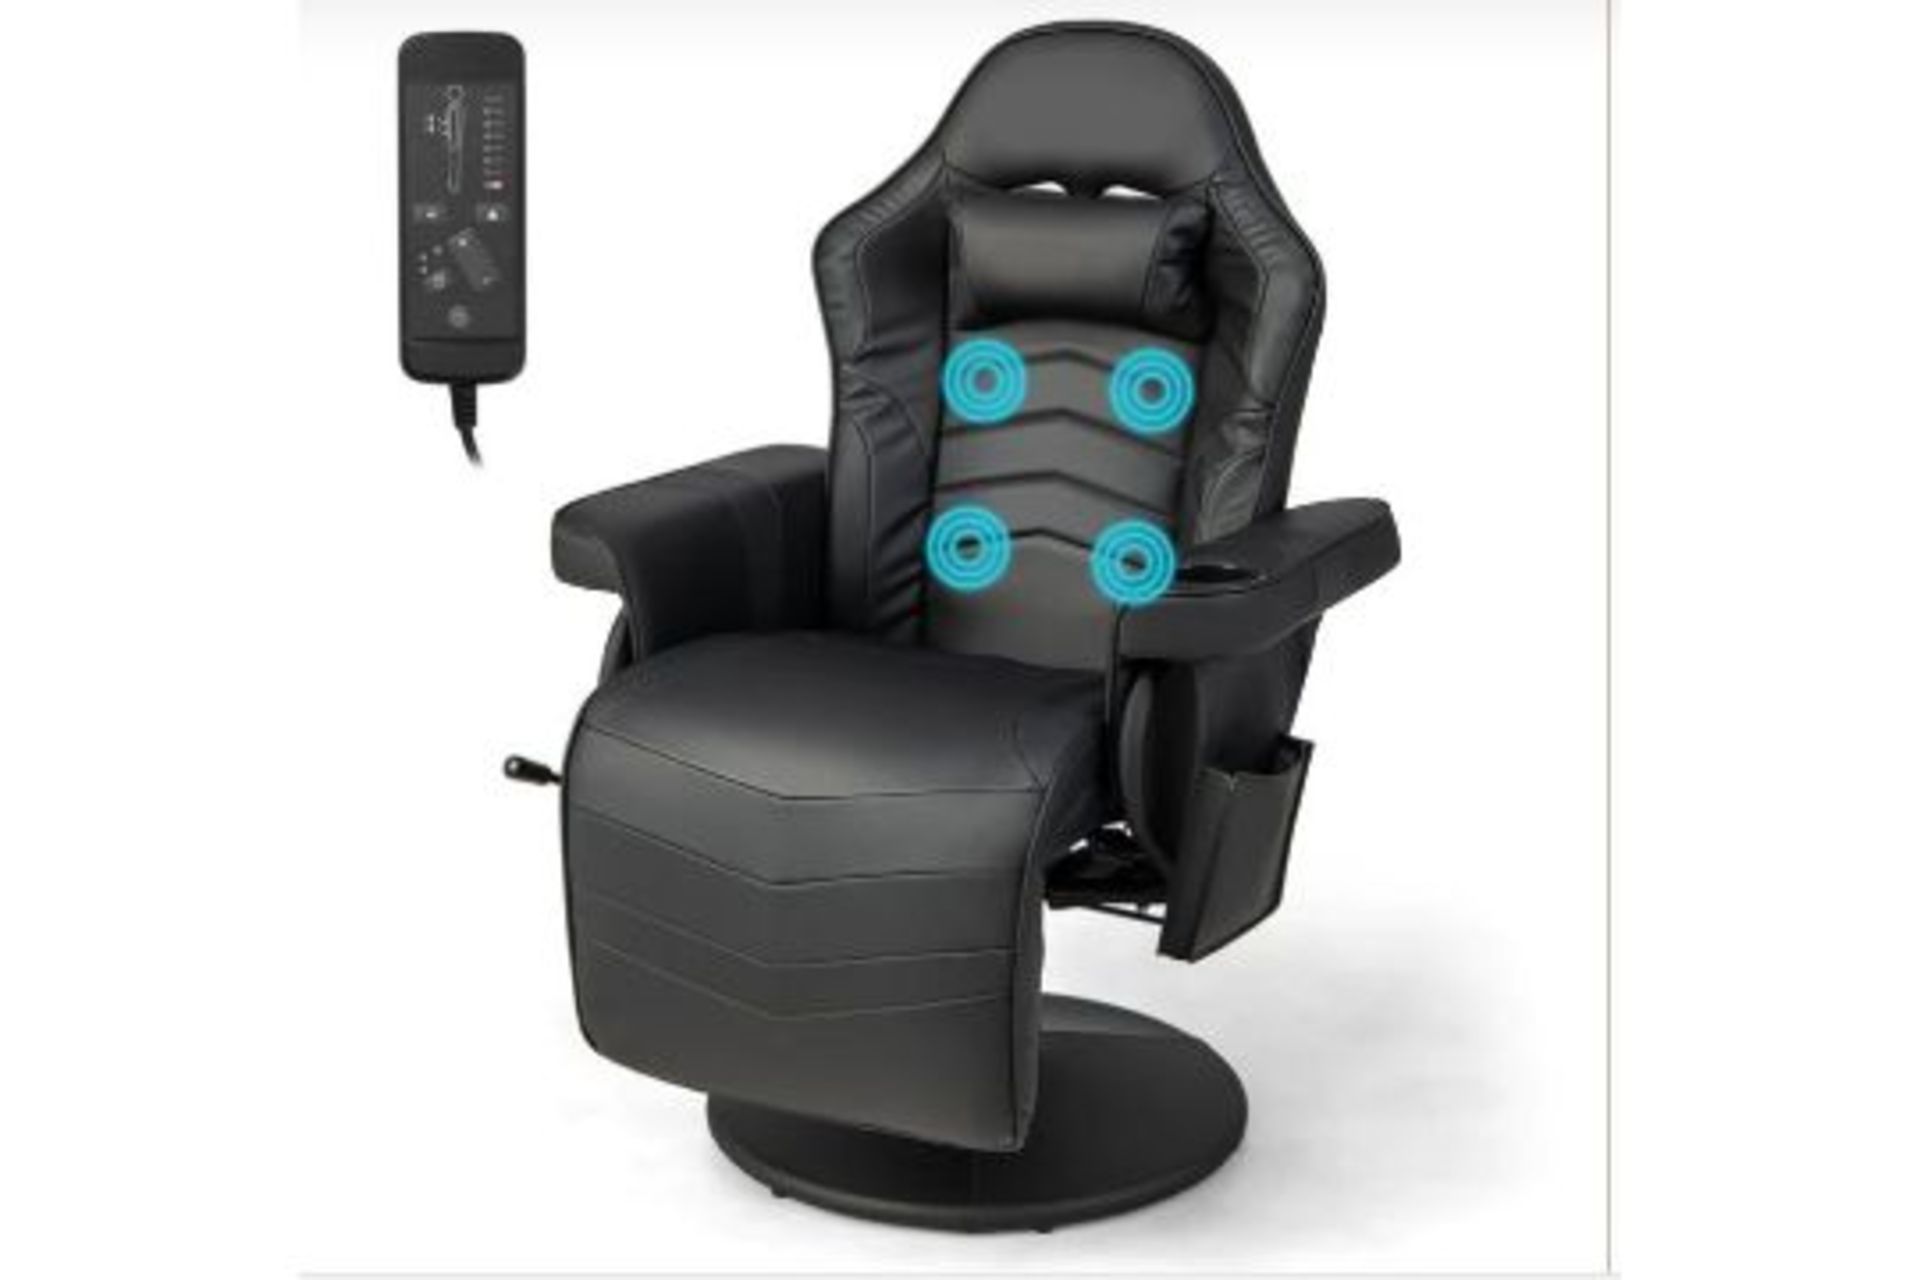 ELECTRIC MASSAGE GAMING CHAIR WITH CUP HOLDER AND SIDE POUCH-BLACK. - R14.2. This massage gaming